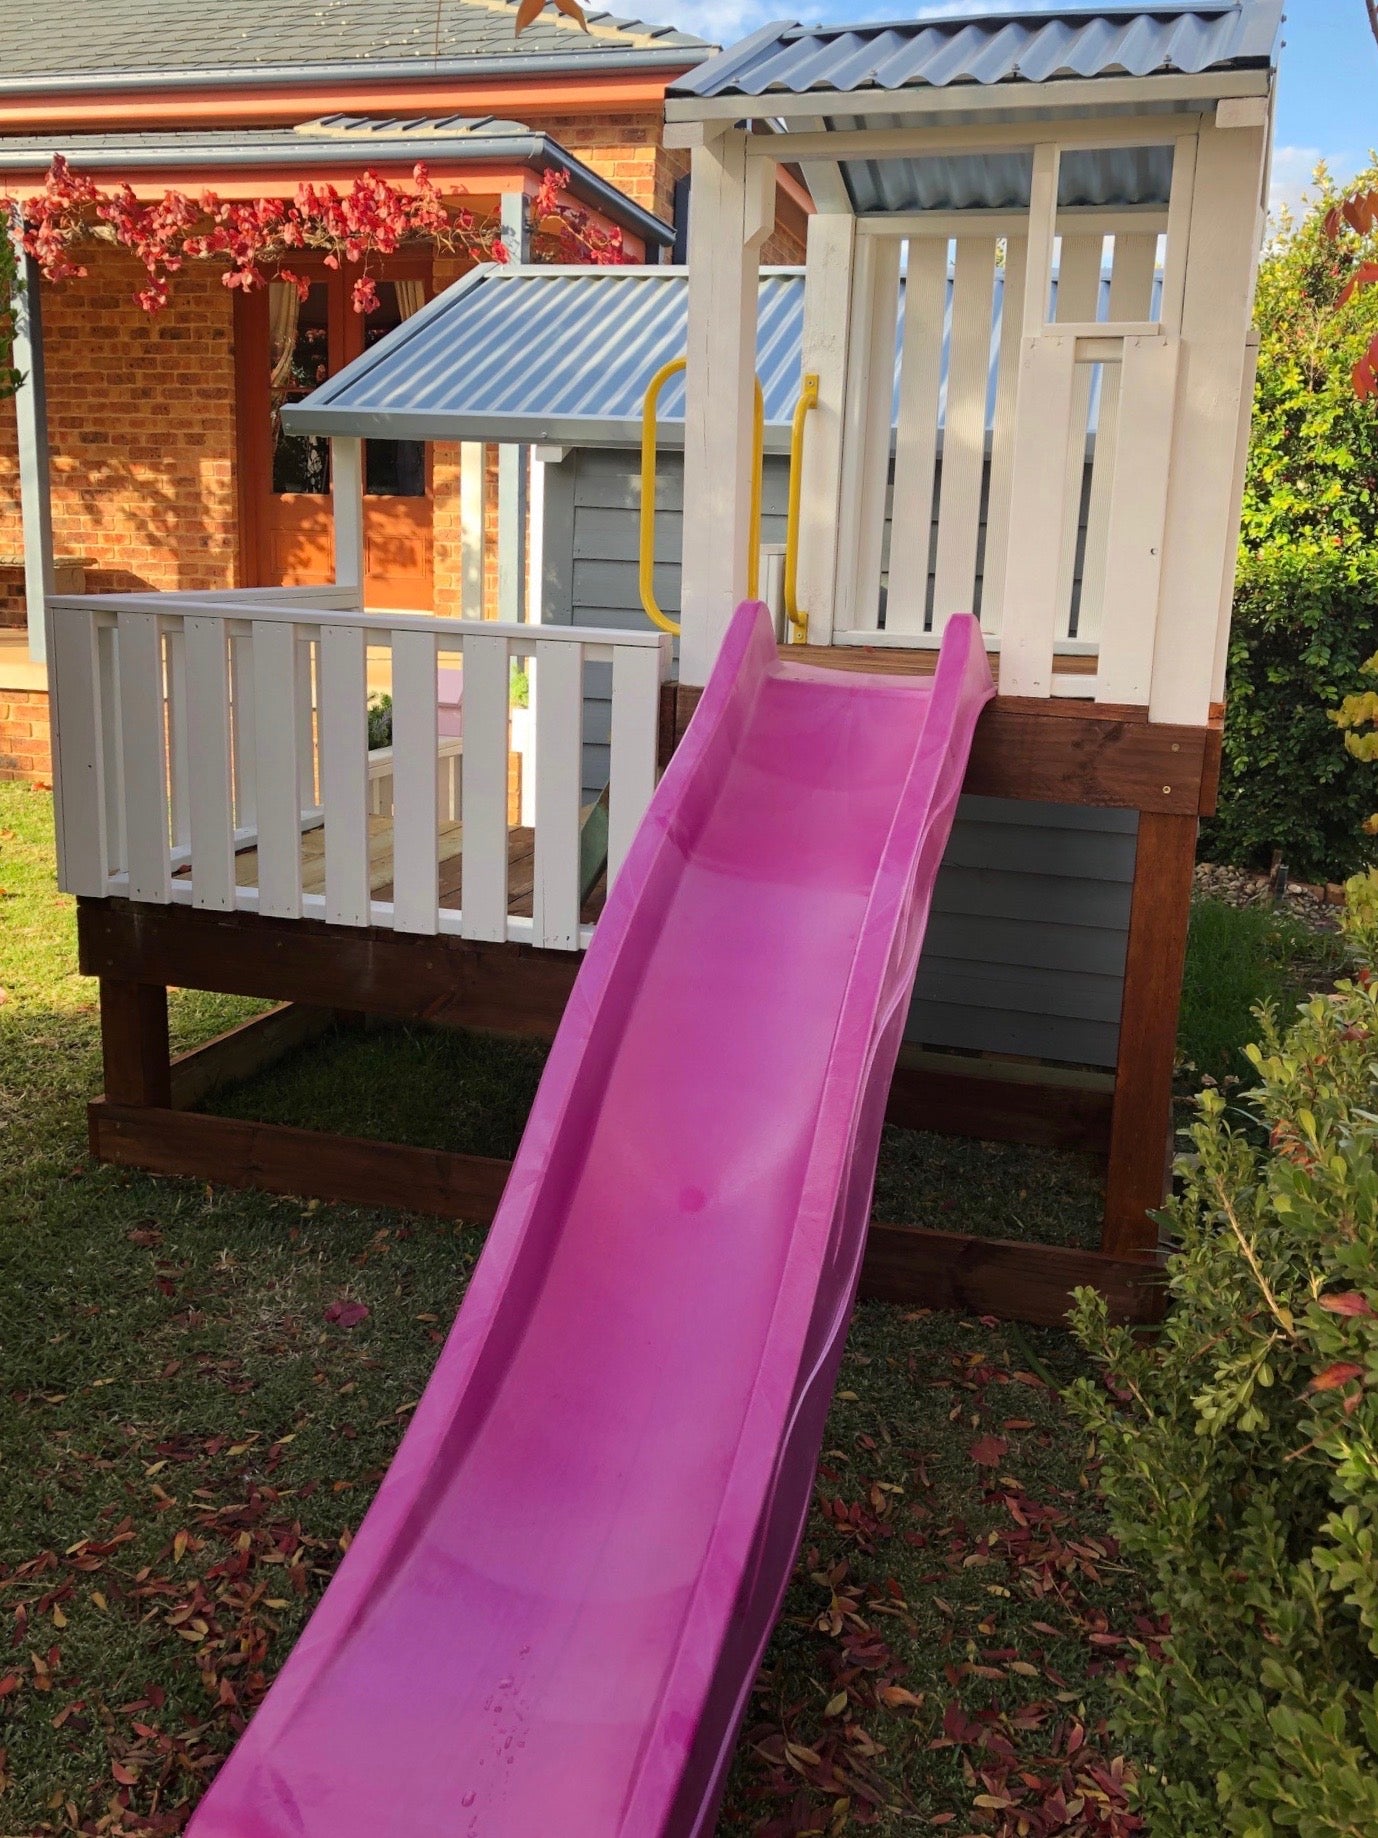 Shown with a plastic slide.